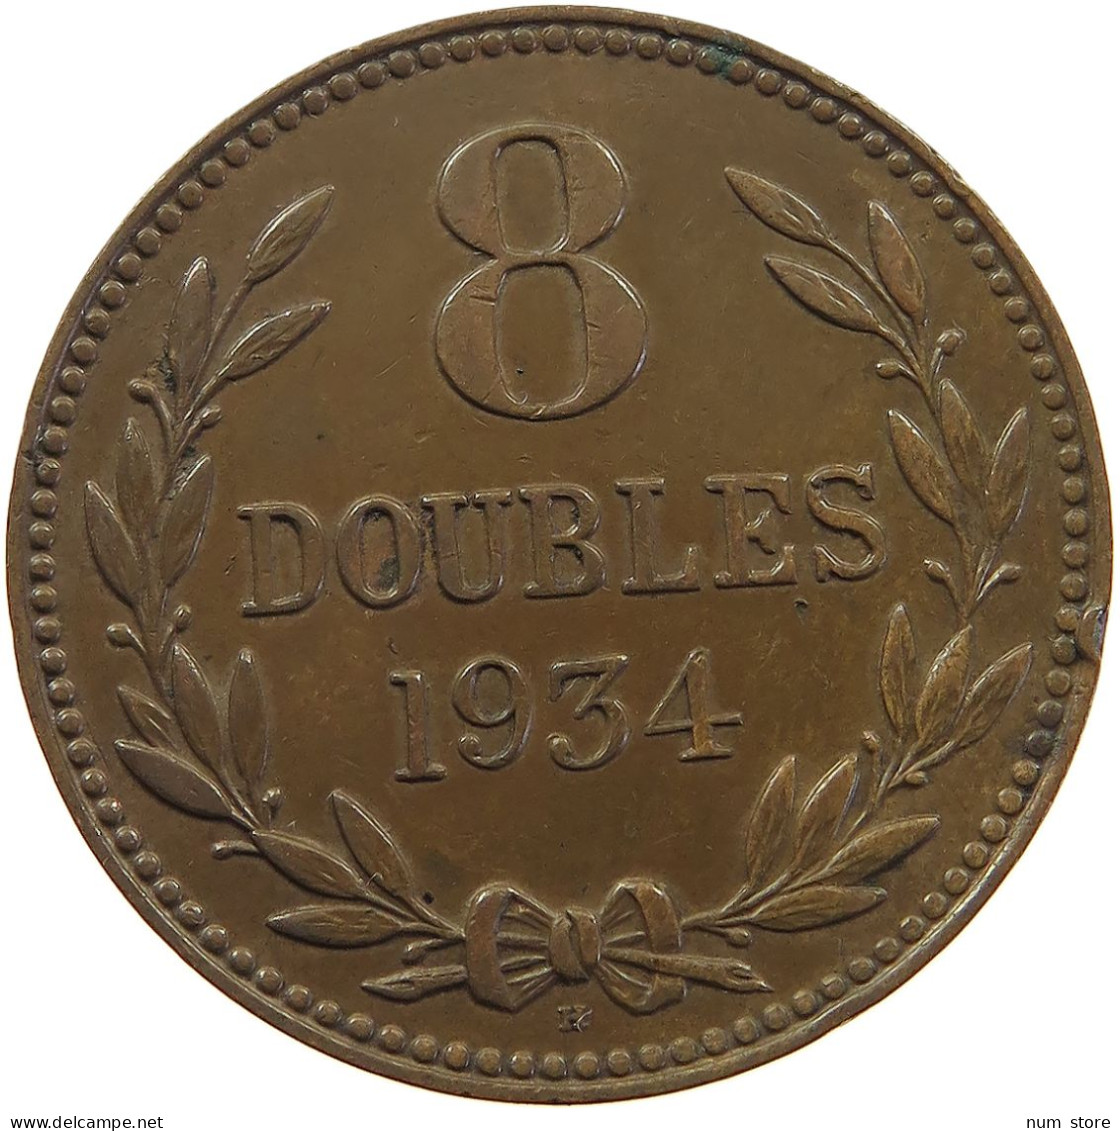 GUERNSEY 8 DOUBLES 1934 LOUIS I. (1861-1889) #MA 101946 - Guernesey